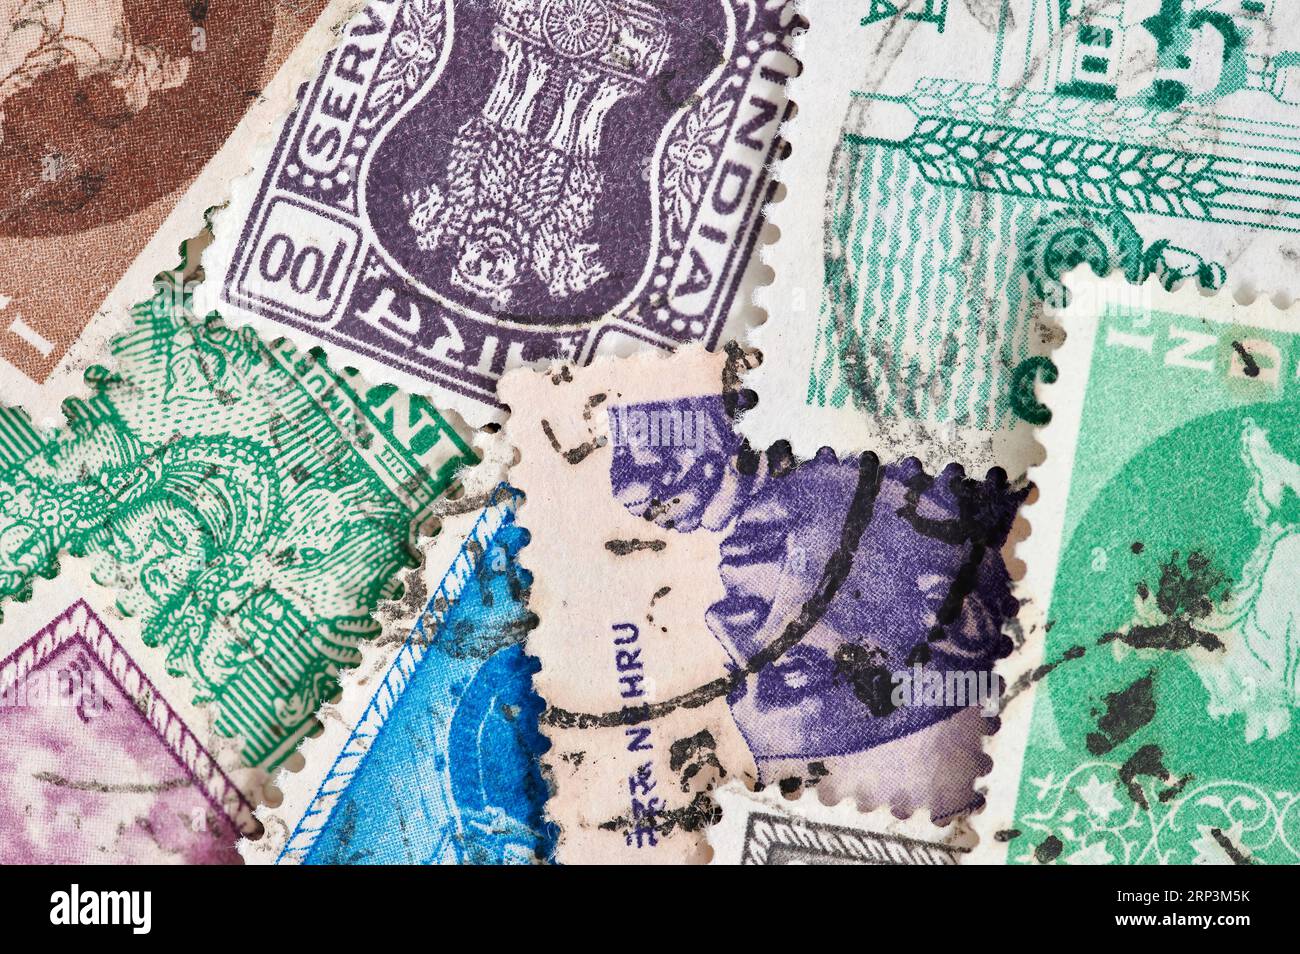 Madrid, Spain; 08-13-2023: Group of postage stamps from the Hindu country of India with motifs about their religion and culture forming a background Stock Photo